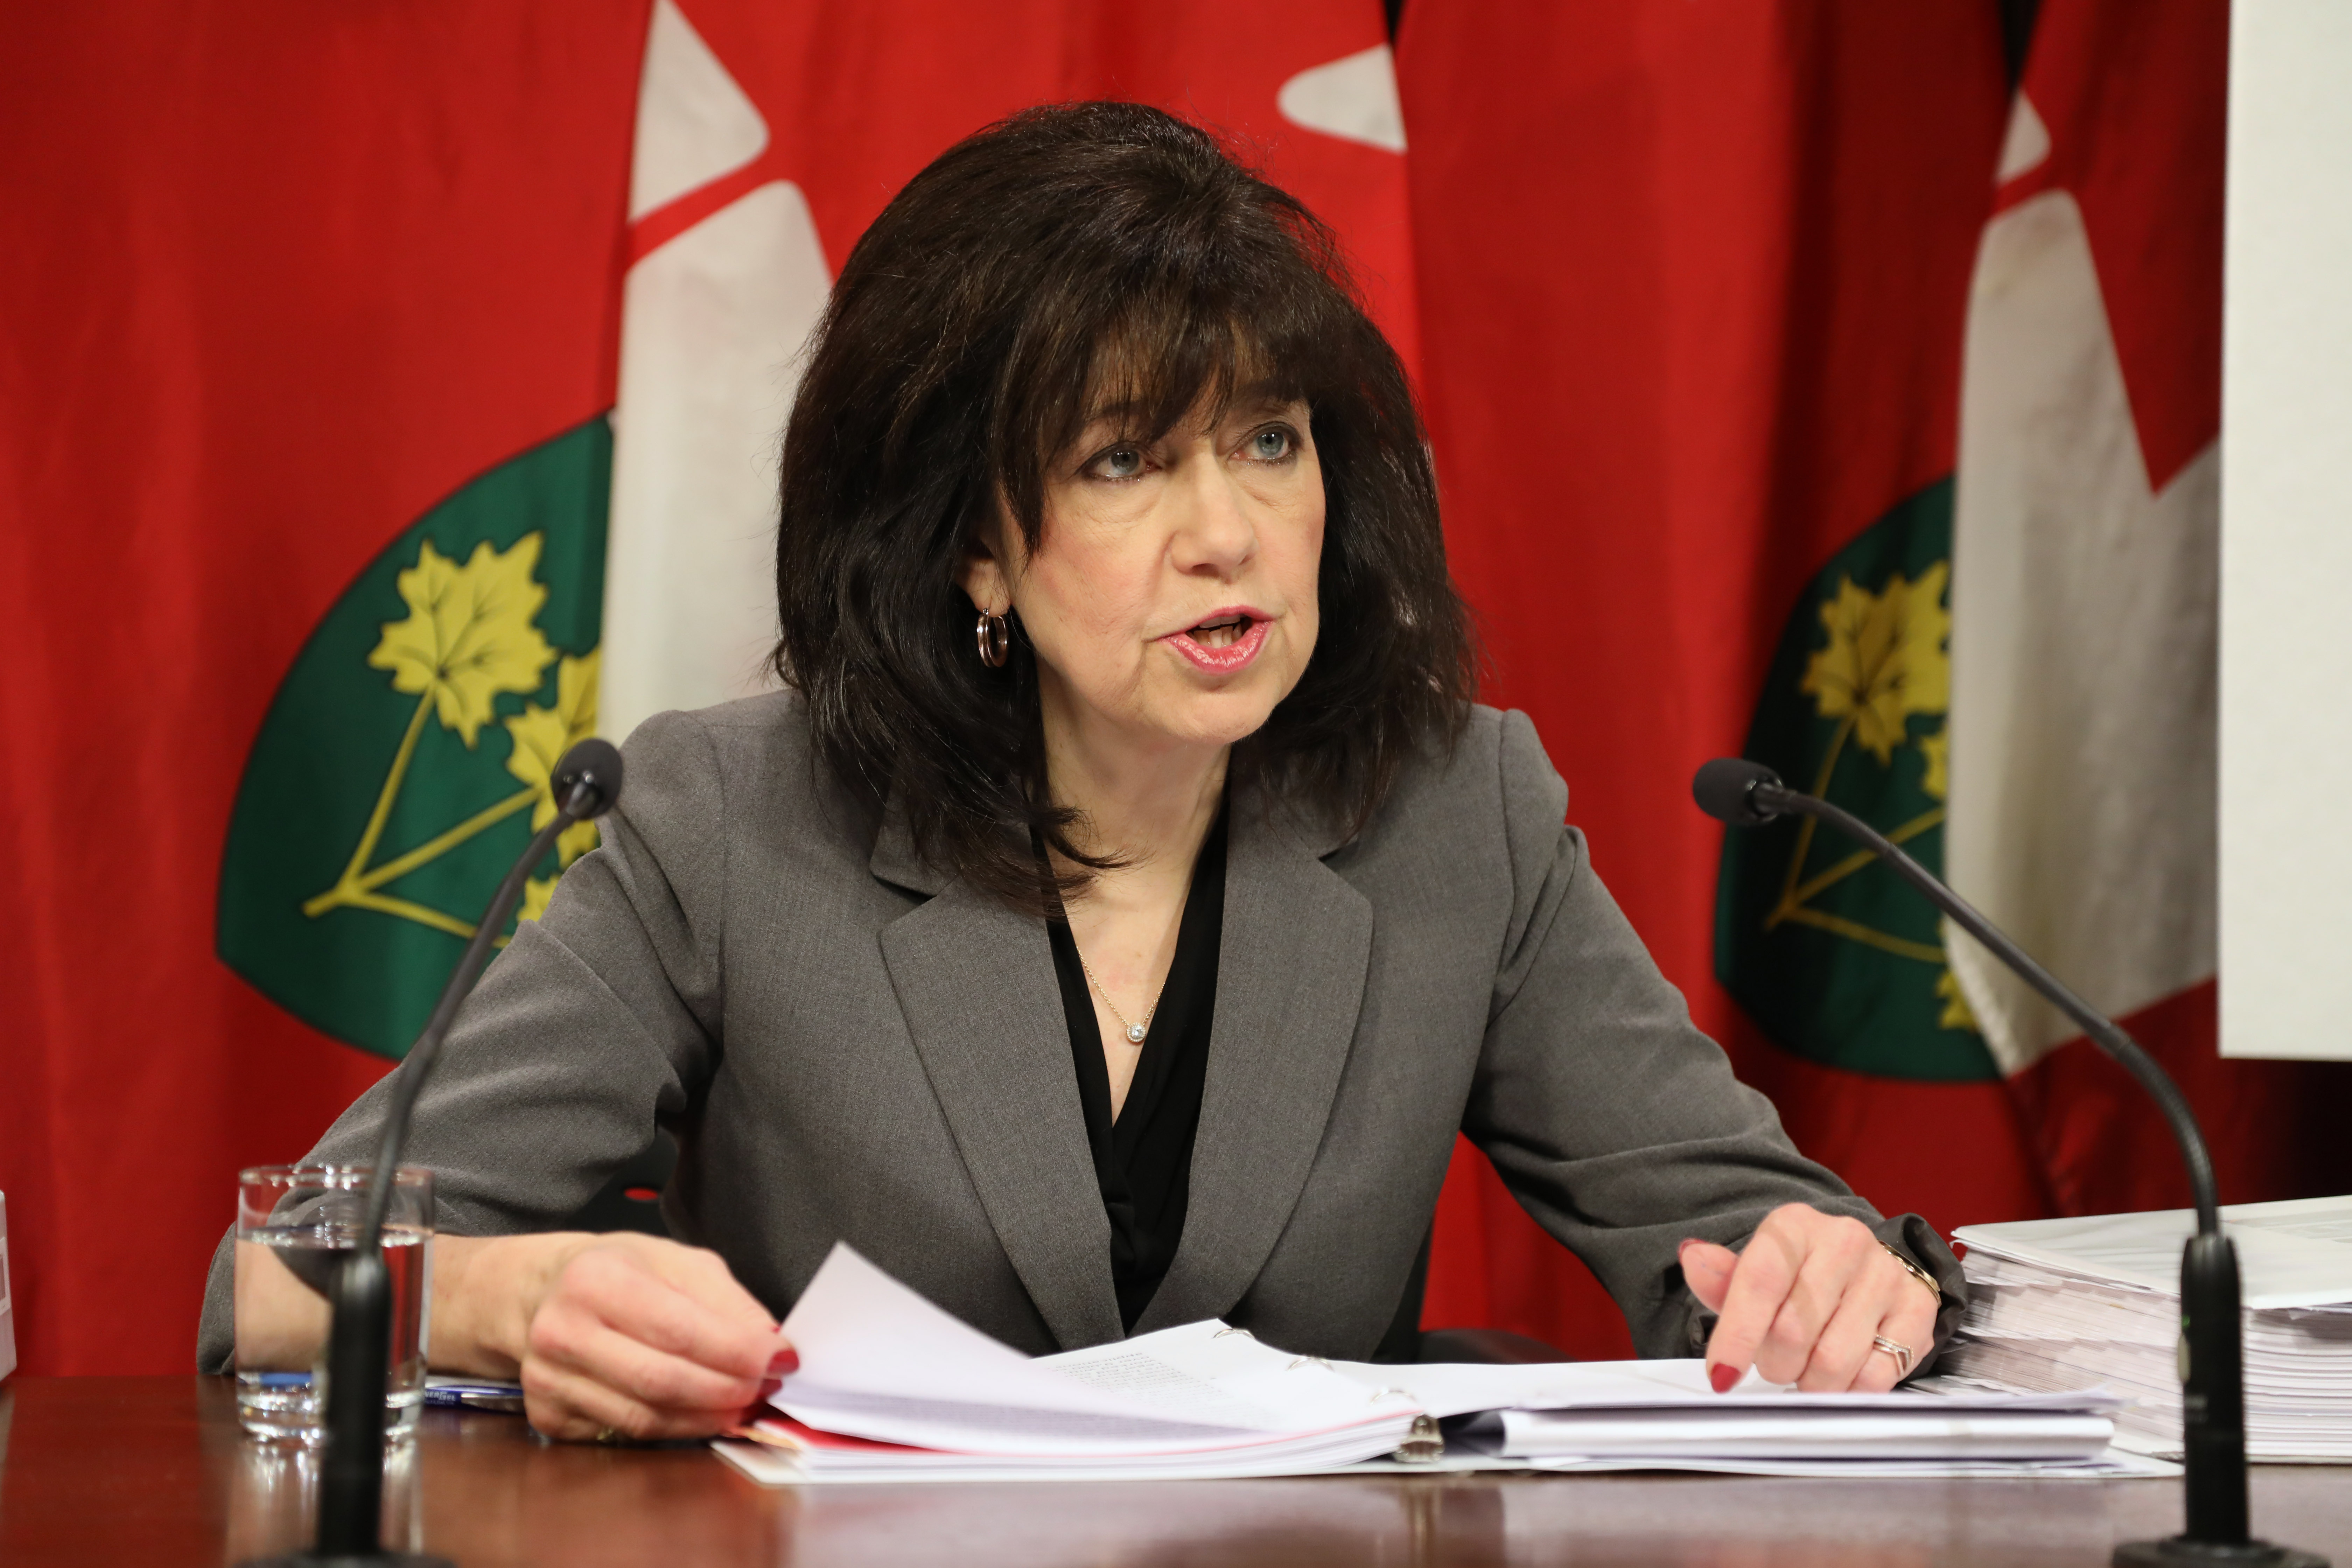 New gambling structure in Ontario an 'inherent conflict-of-interest': Auditor